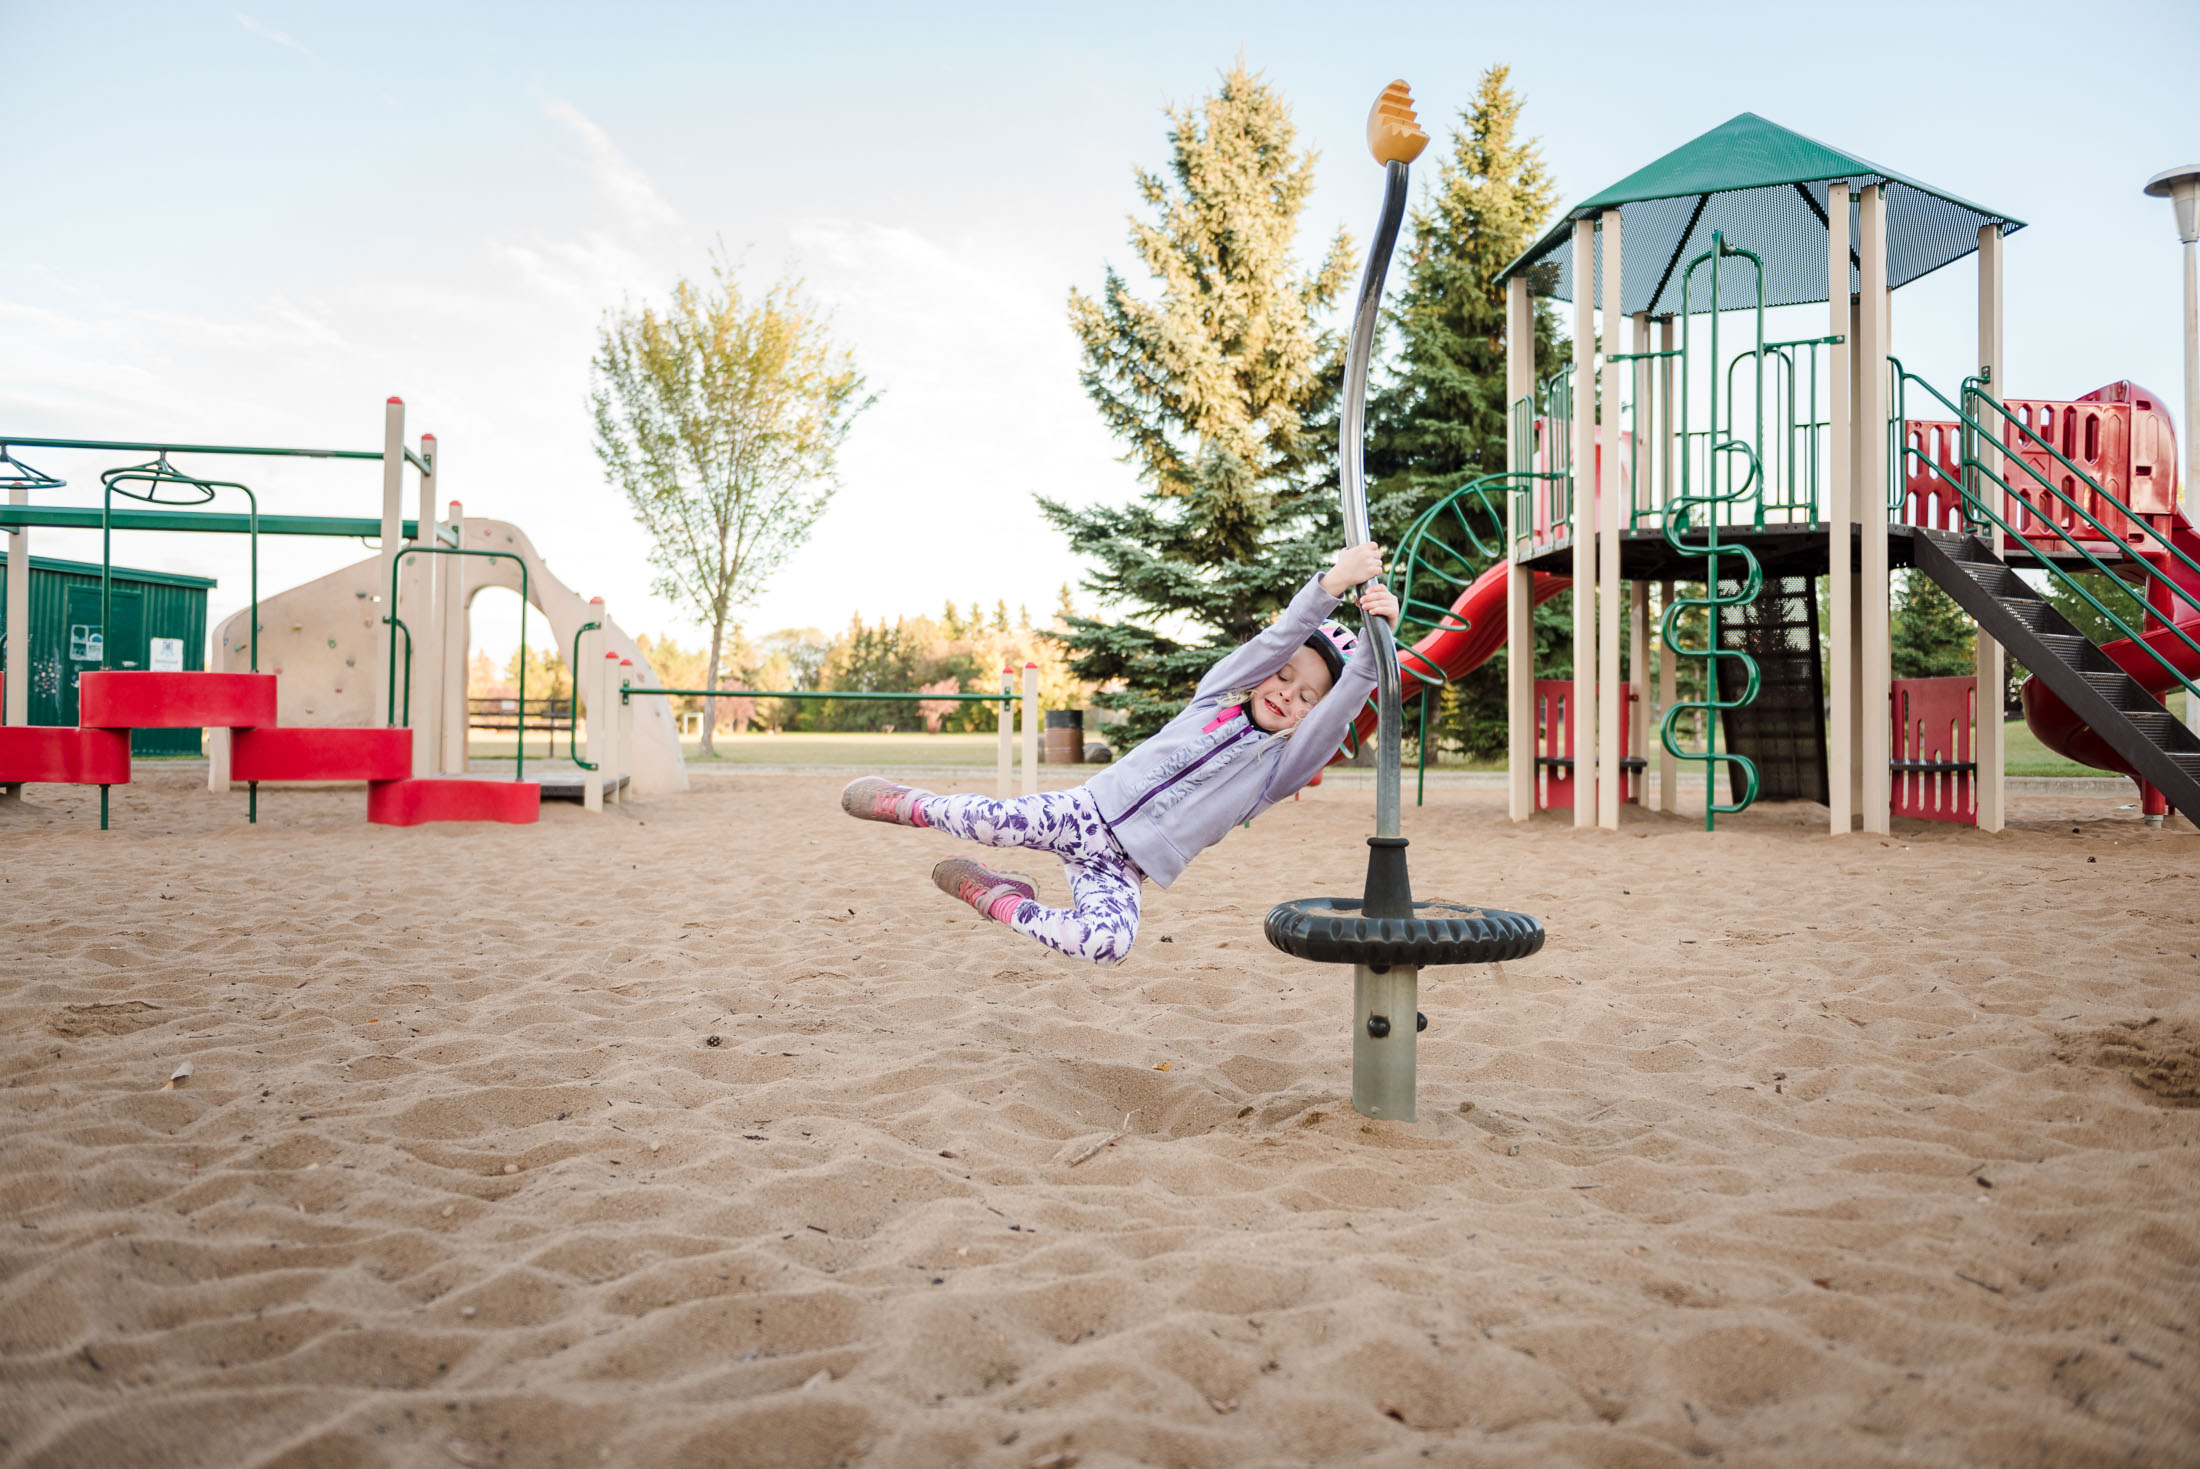 A little girl spins at an Edmonton playground during a fun family photo session